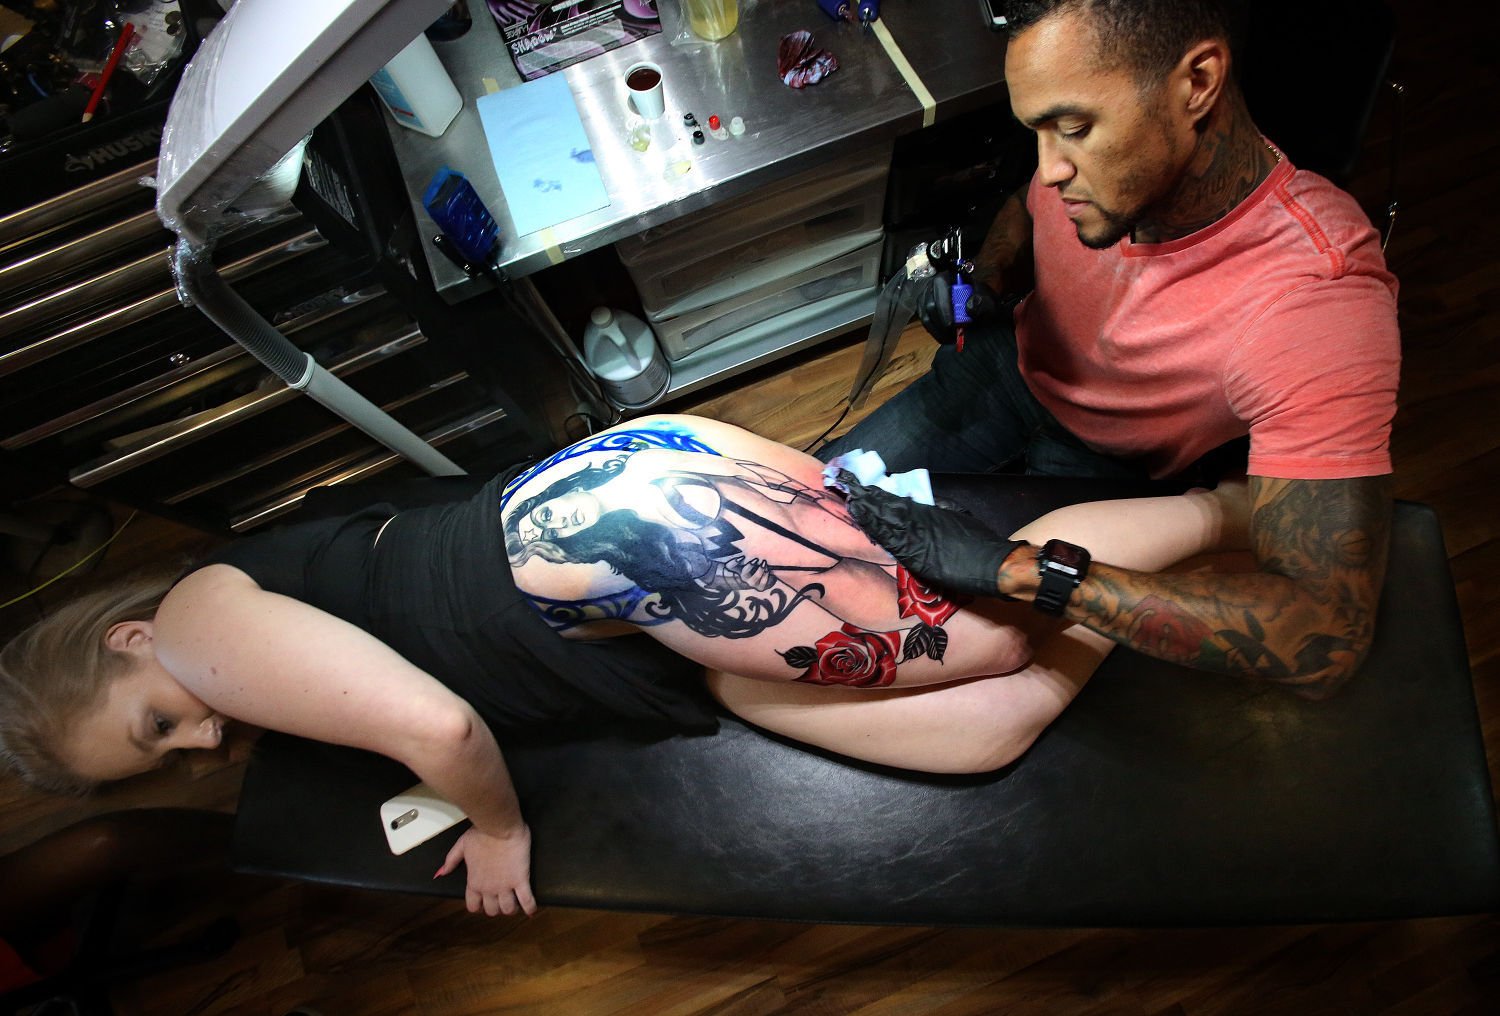 Tattoo artist competes on Spike TV's 'Ink Master' | Community News |  postandcourier.com